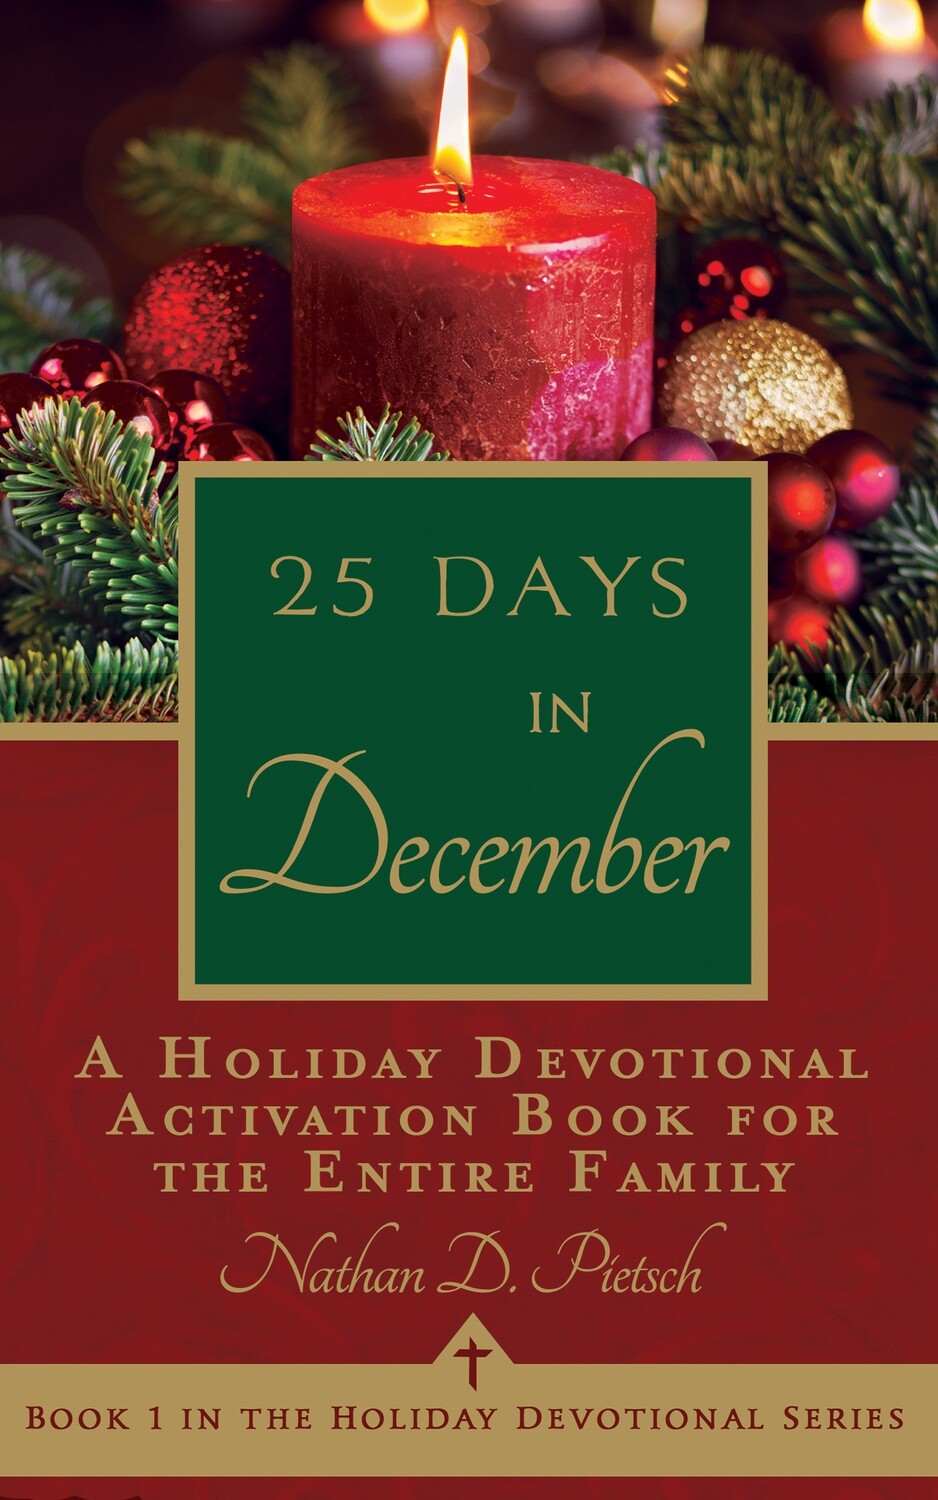 25 Days in December (Holiday Devotional Series, Book 1)